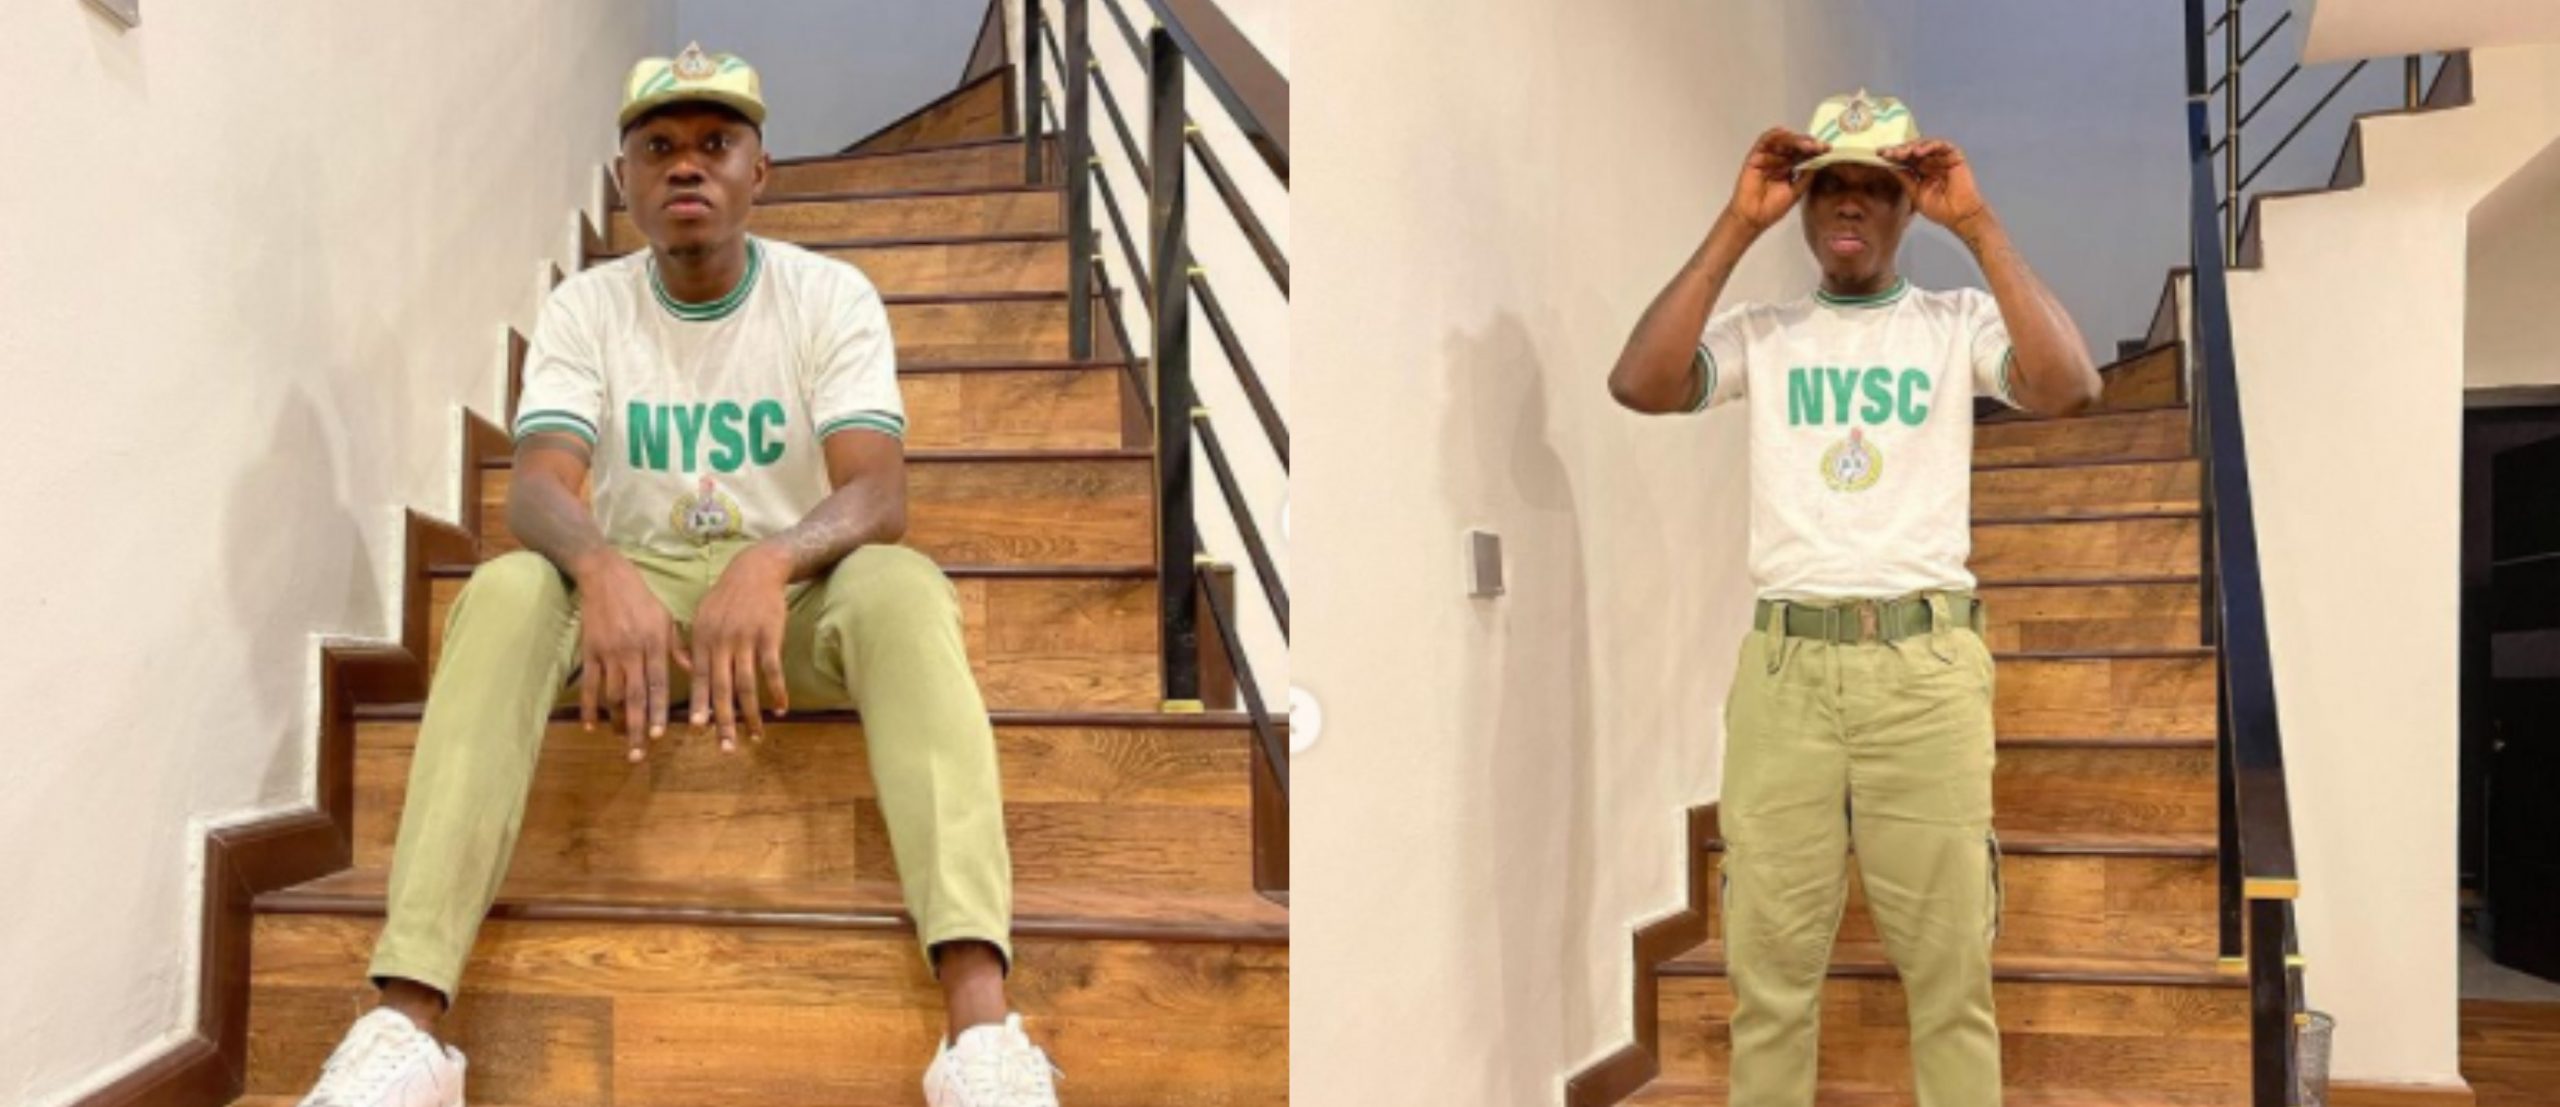 Nigerians demand to see certificate after Zlatan shared NYSC photos